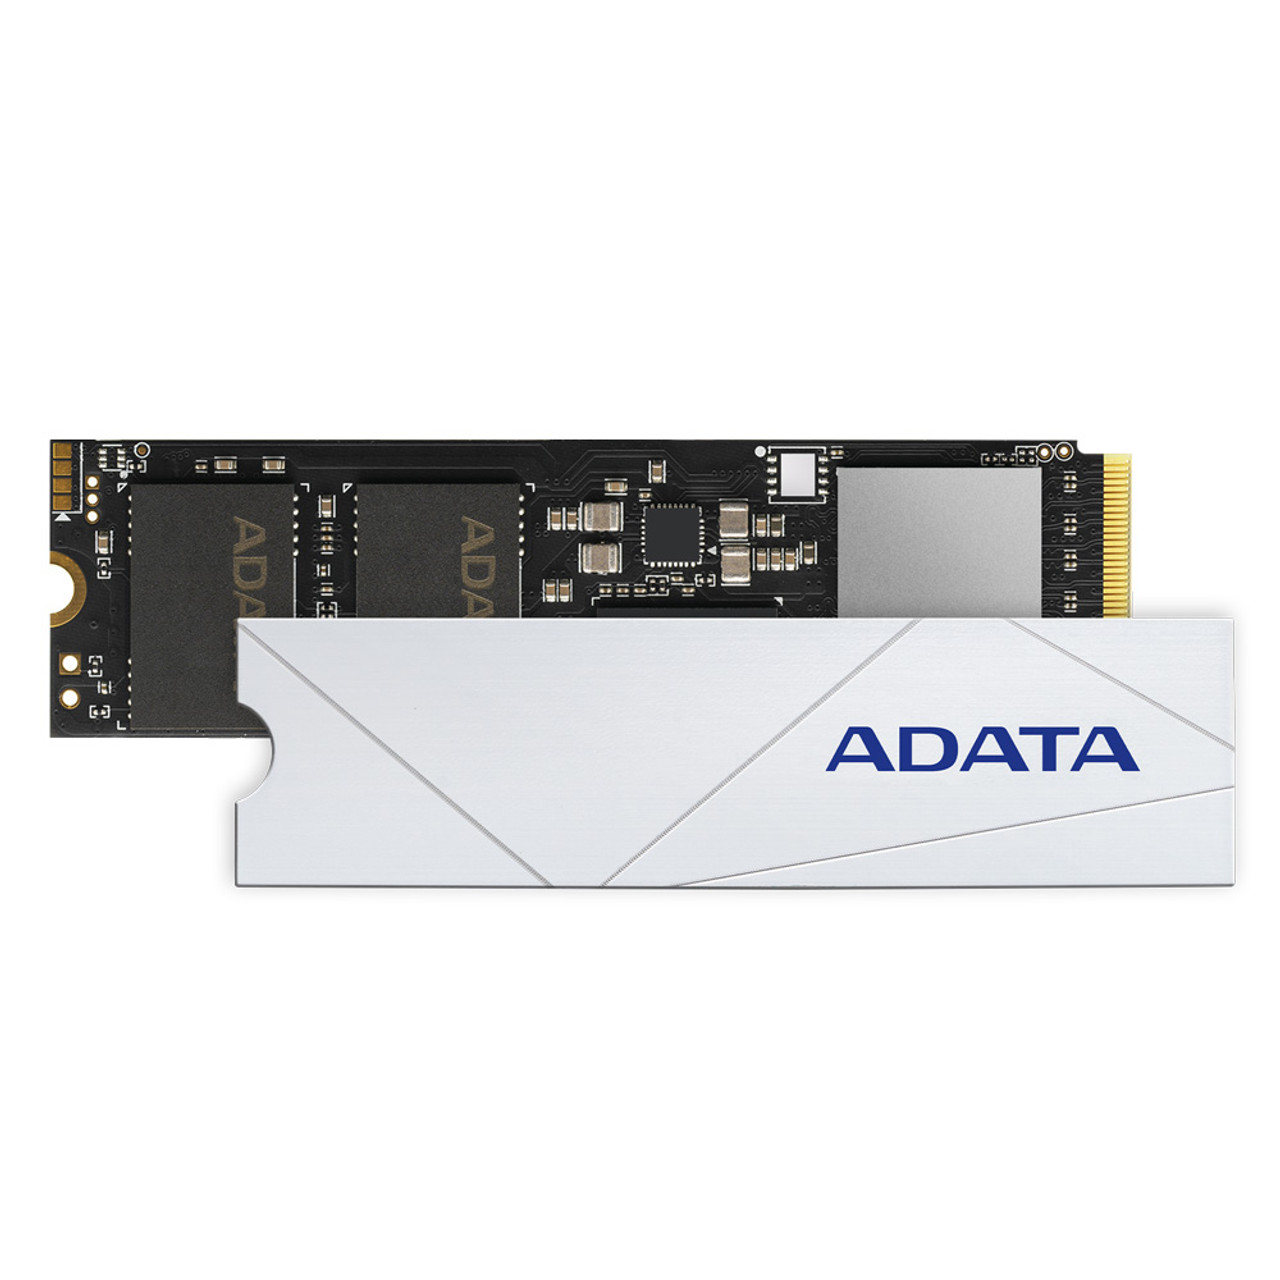  ADATA 2TB Premium SSD for PS5 PCIe Gen4 M.2 2280 Internal  Gaming SSD Up to 7400 MB/s (APSFG-2T-CSUS) : Electronics